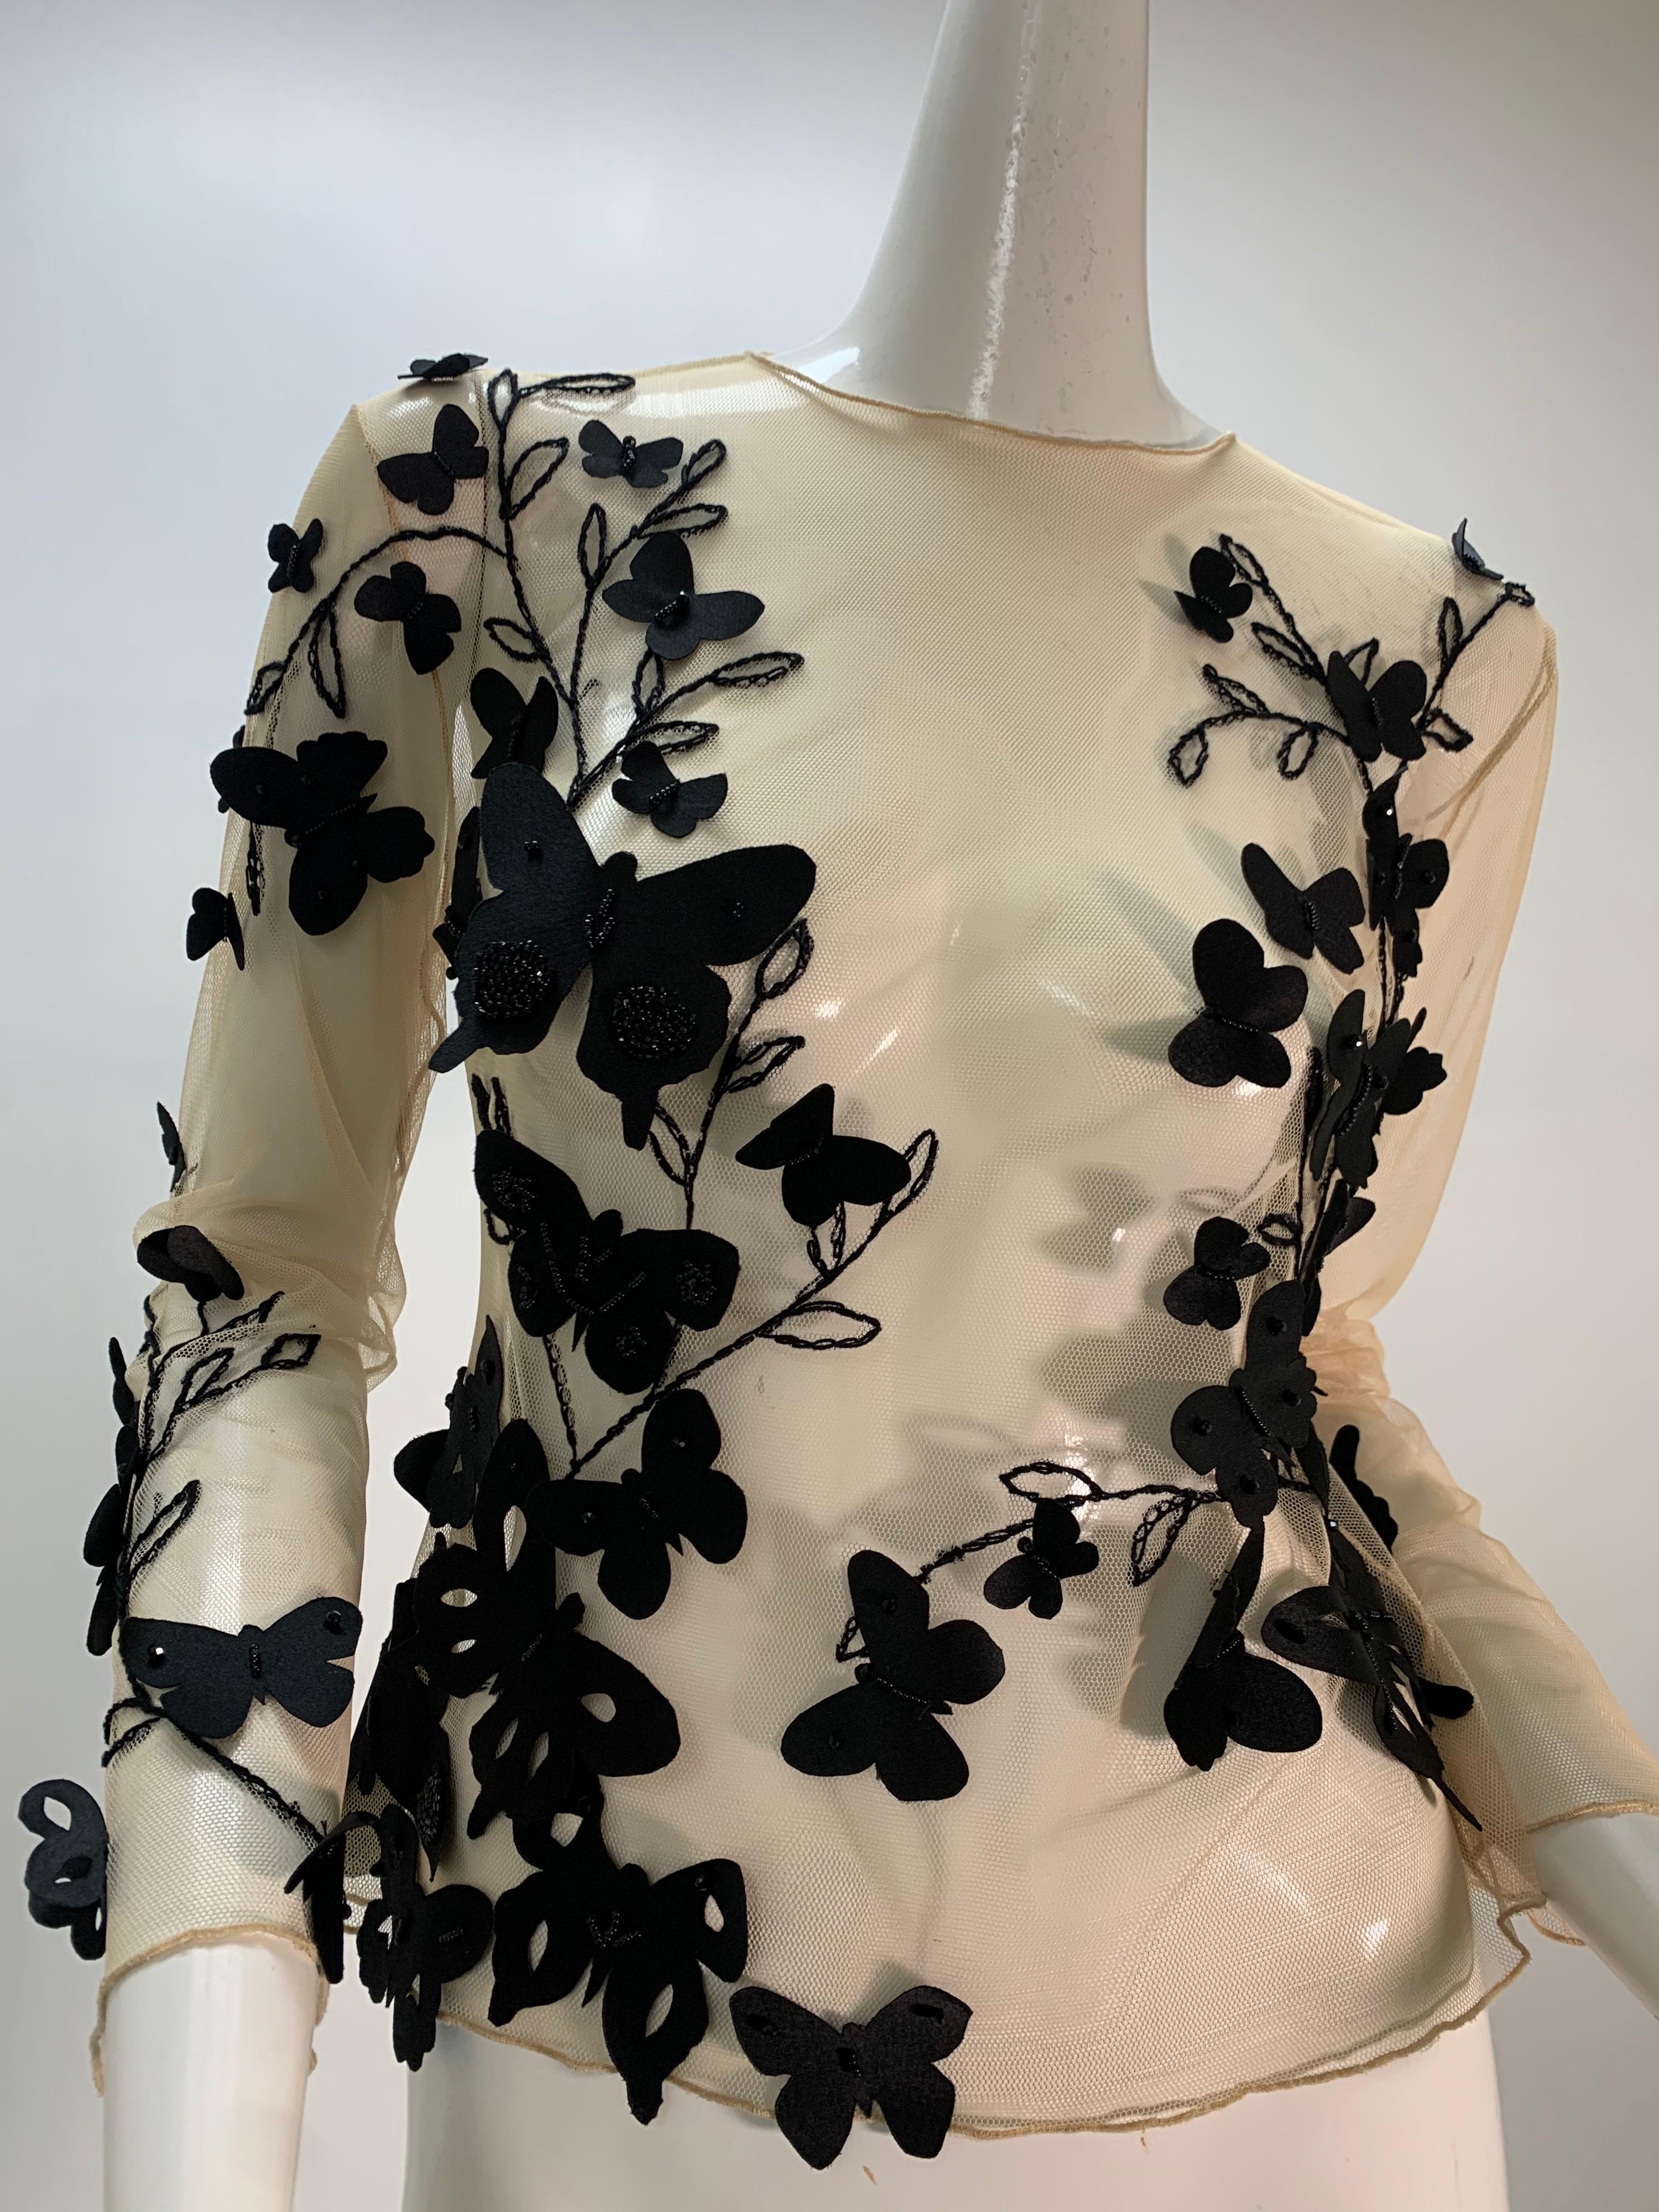 A Torso Creations ivory tulle long sleeved blouse embroidered with black leaf and branch silhouettes with silk satin butterfly appliques and beading. Unlined. 